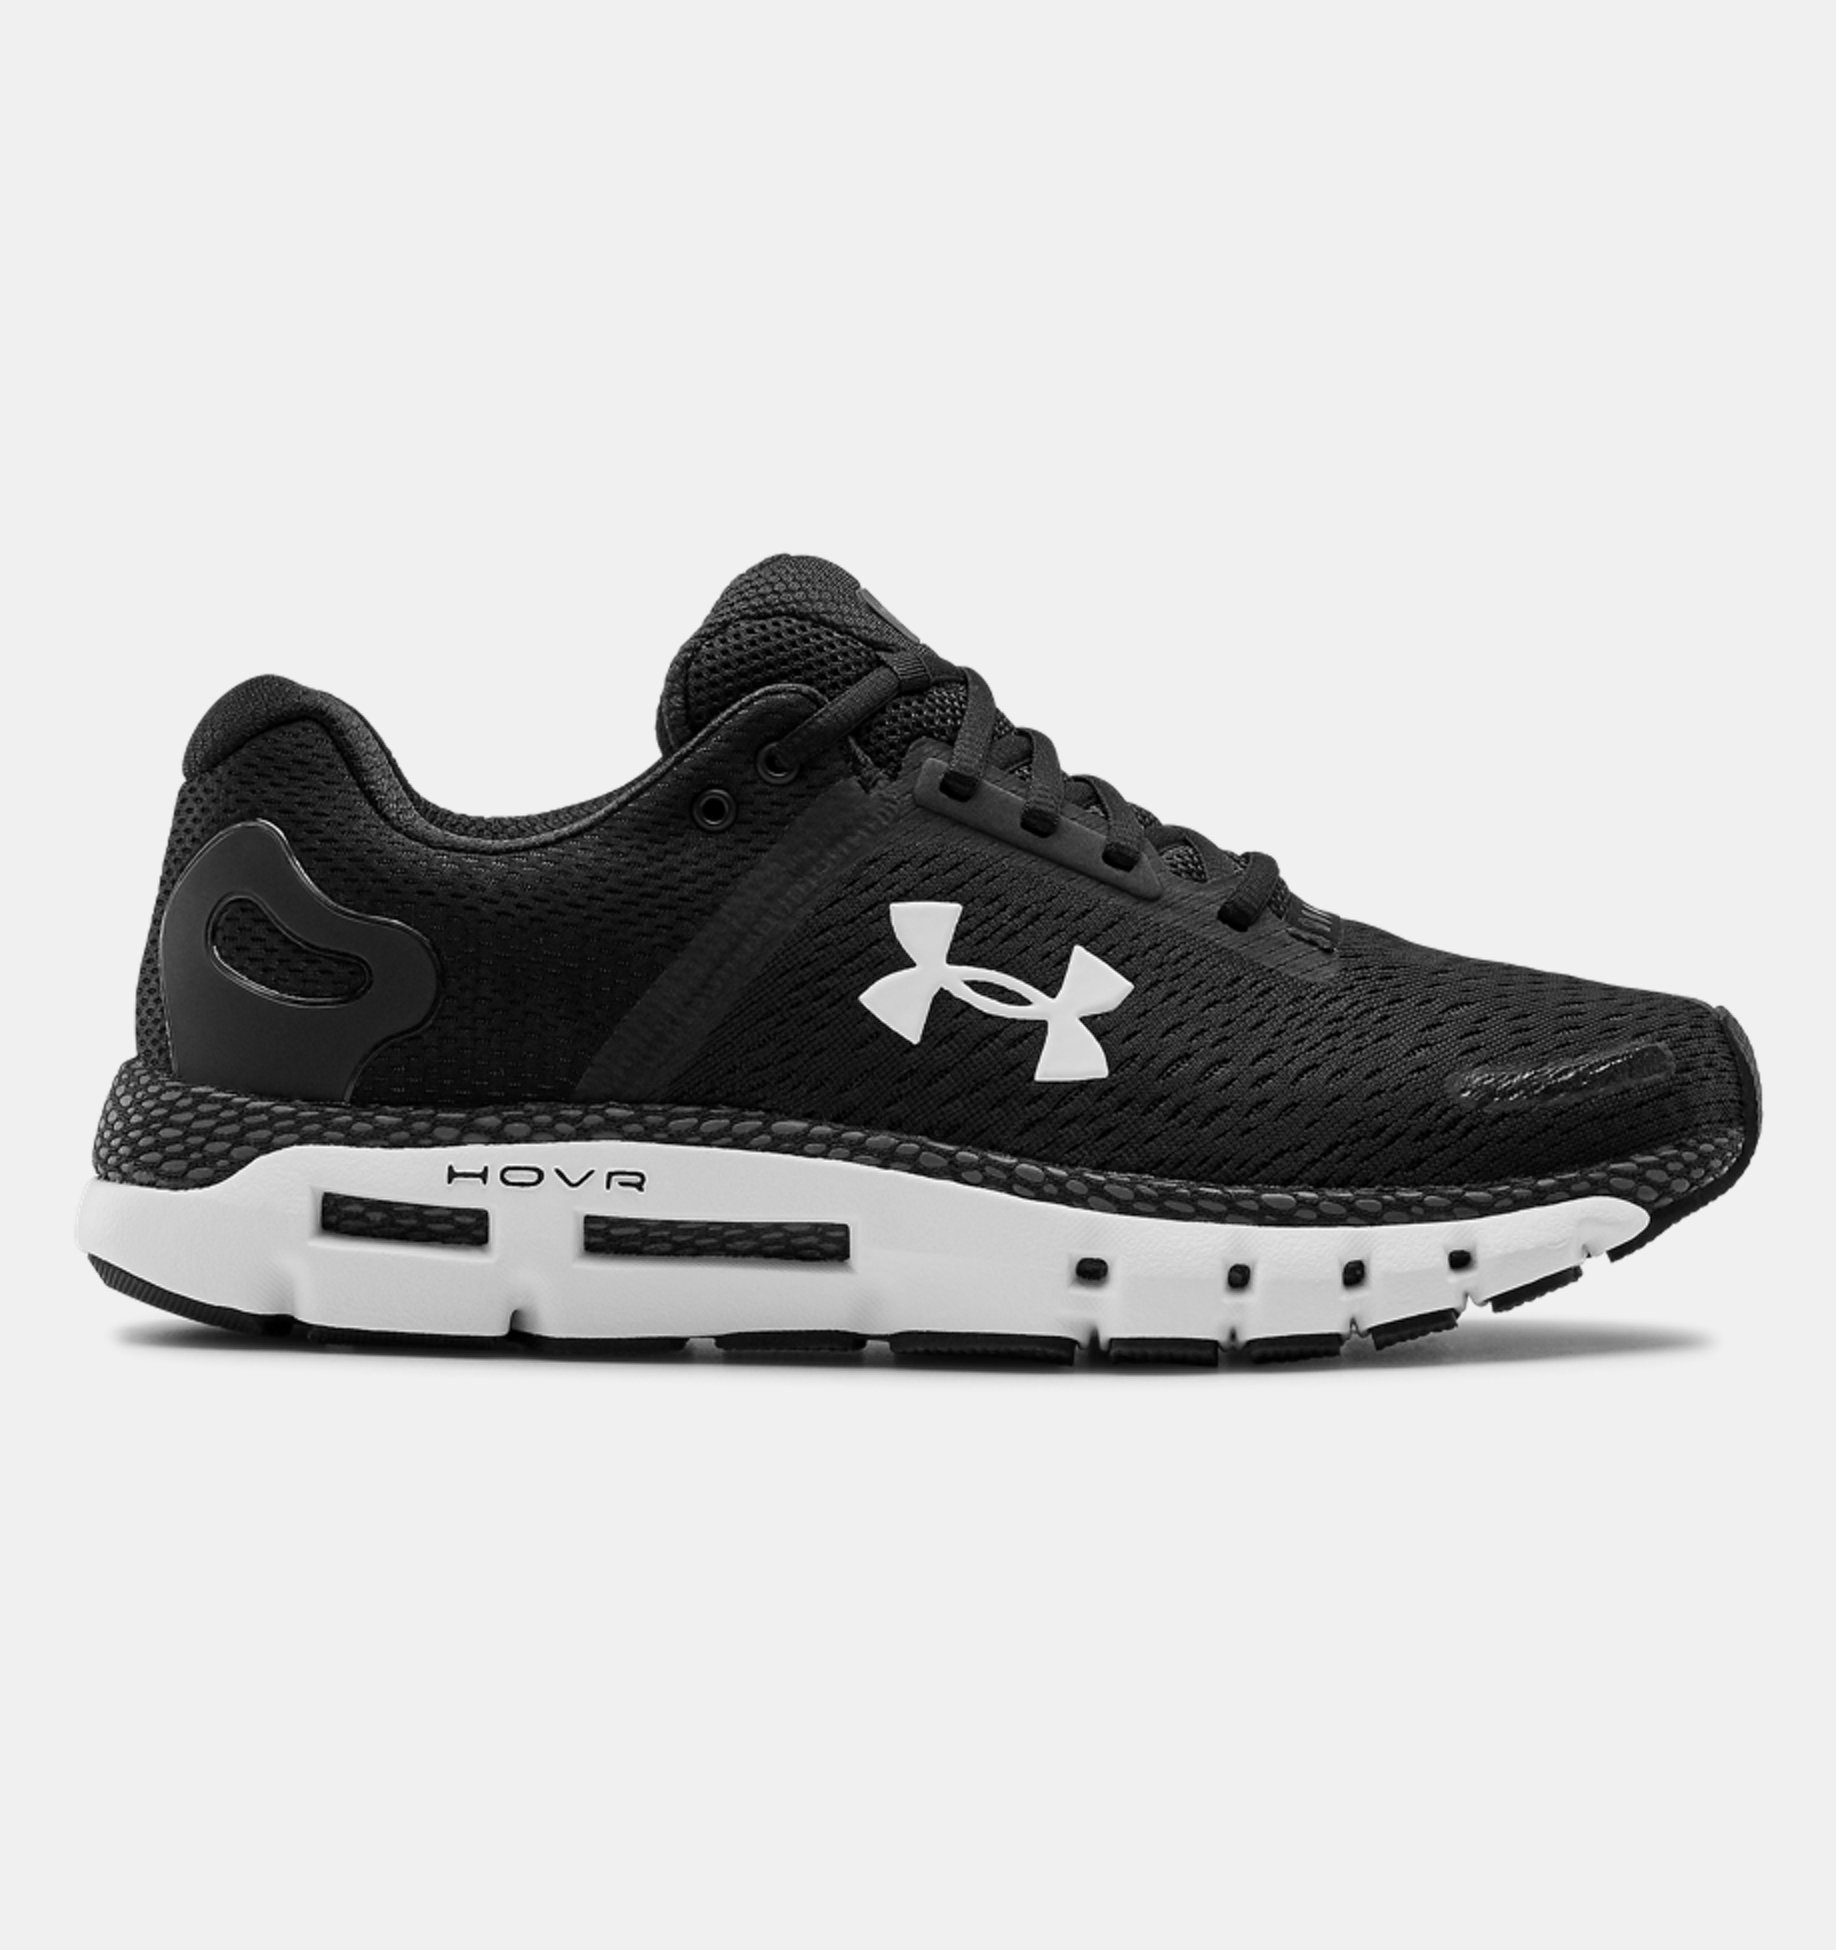 Under Armour Mens HOVR Infinite 2 Running Shoes Trainers Sneakers Black Sports 